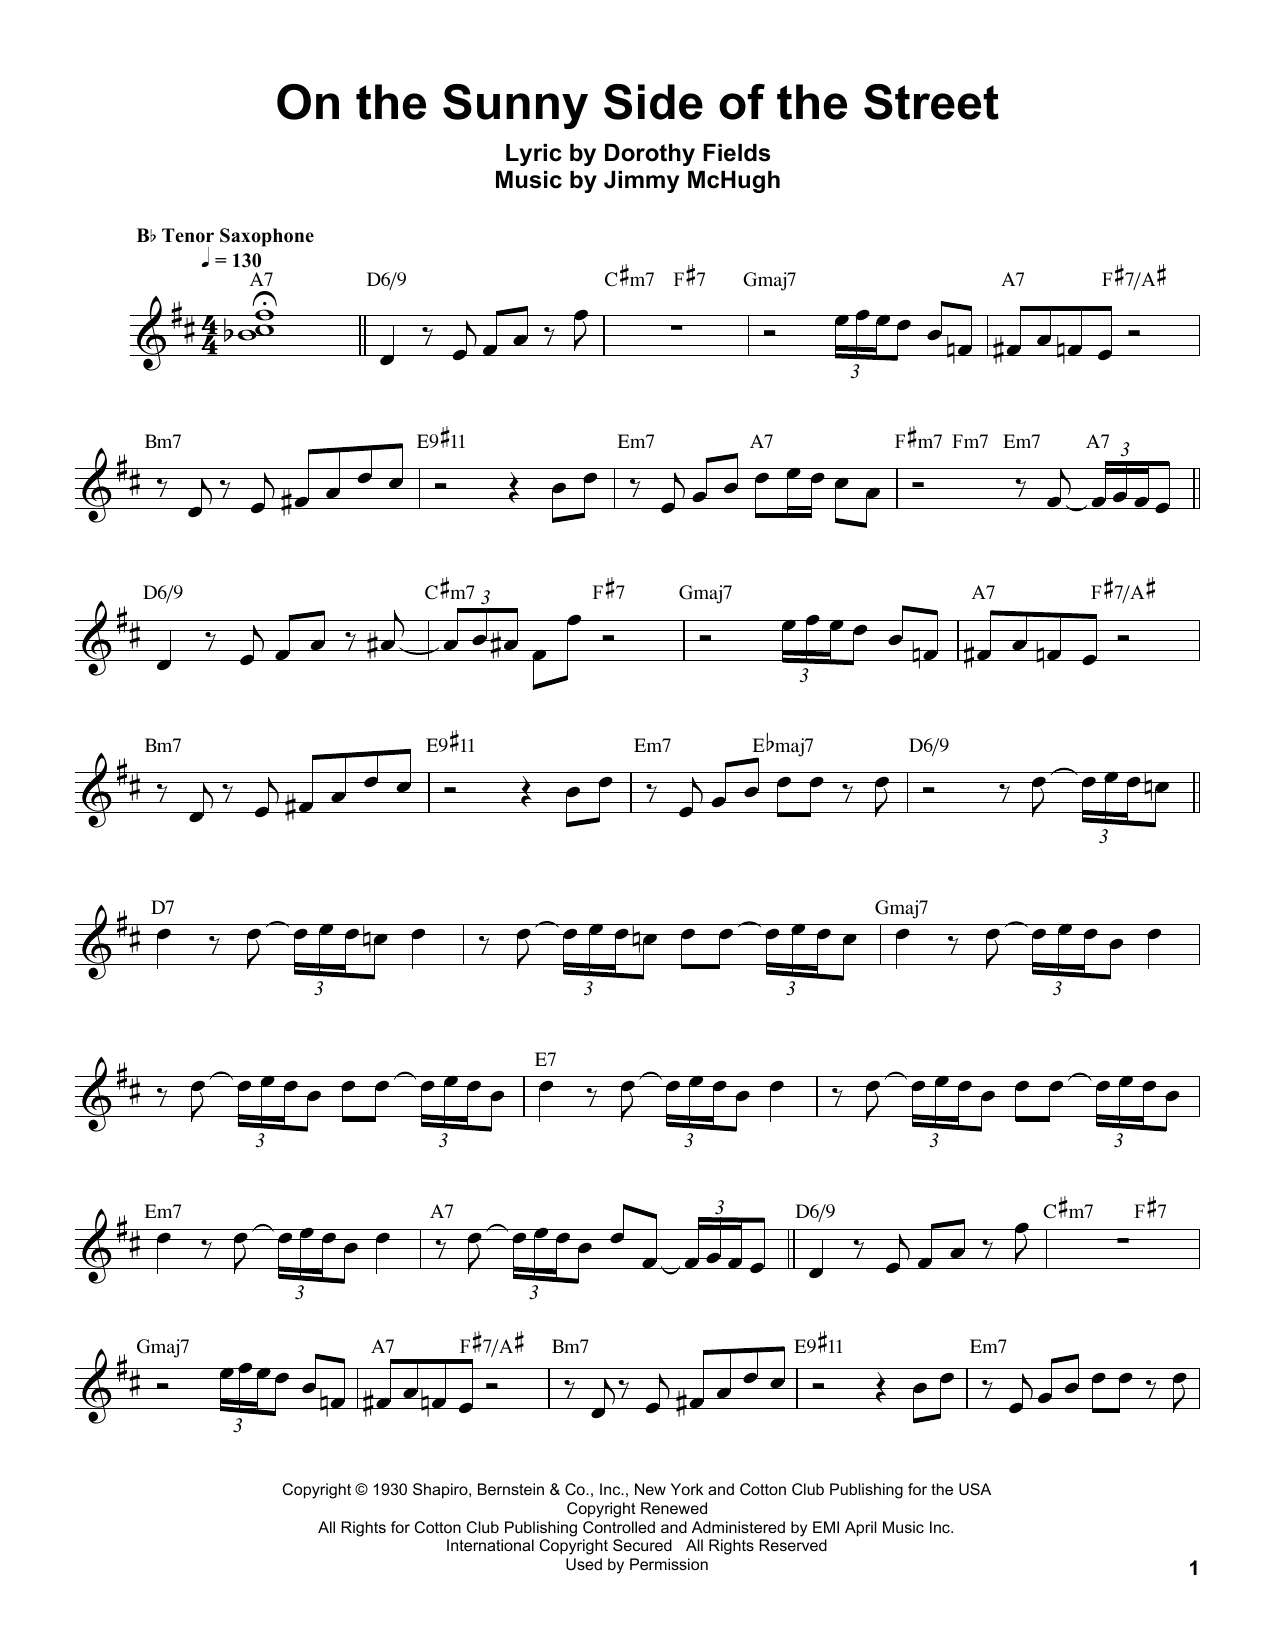 Sonny Stitt On The Sunny Side Of The Street Sheet Music Notes Download Printable Pdf Score 1998